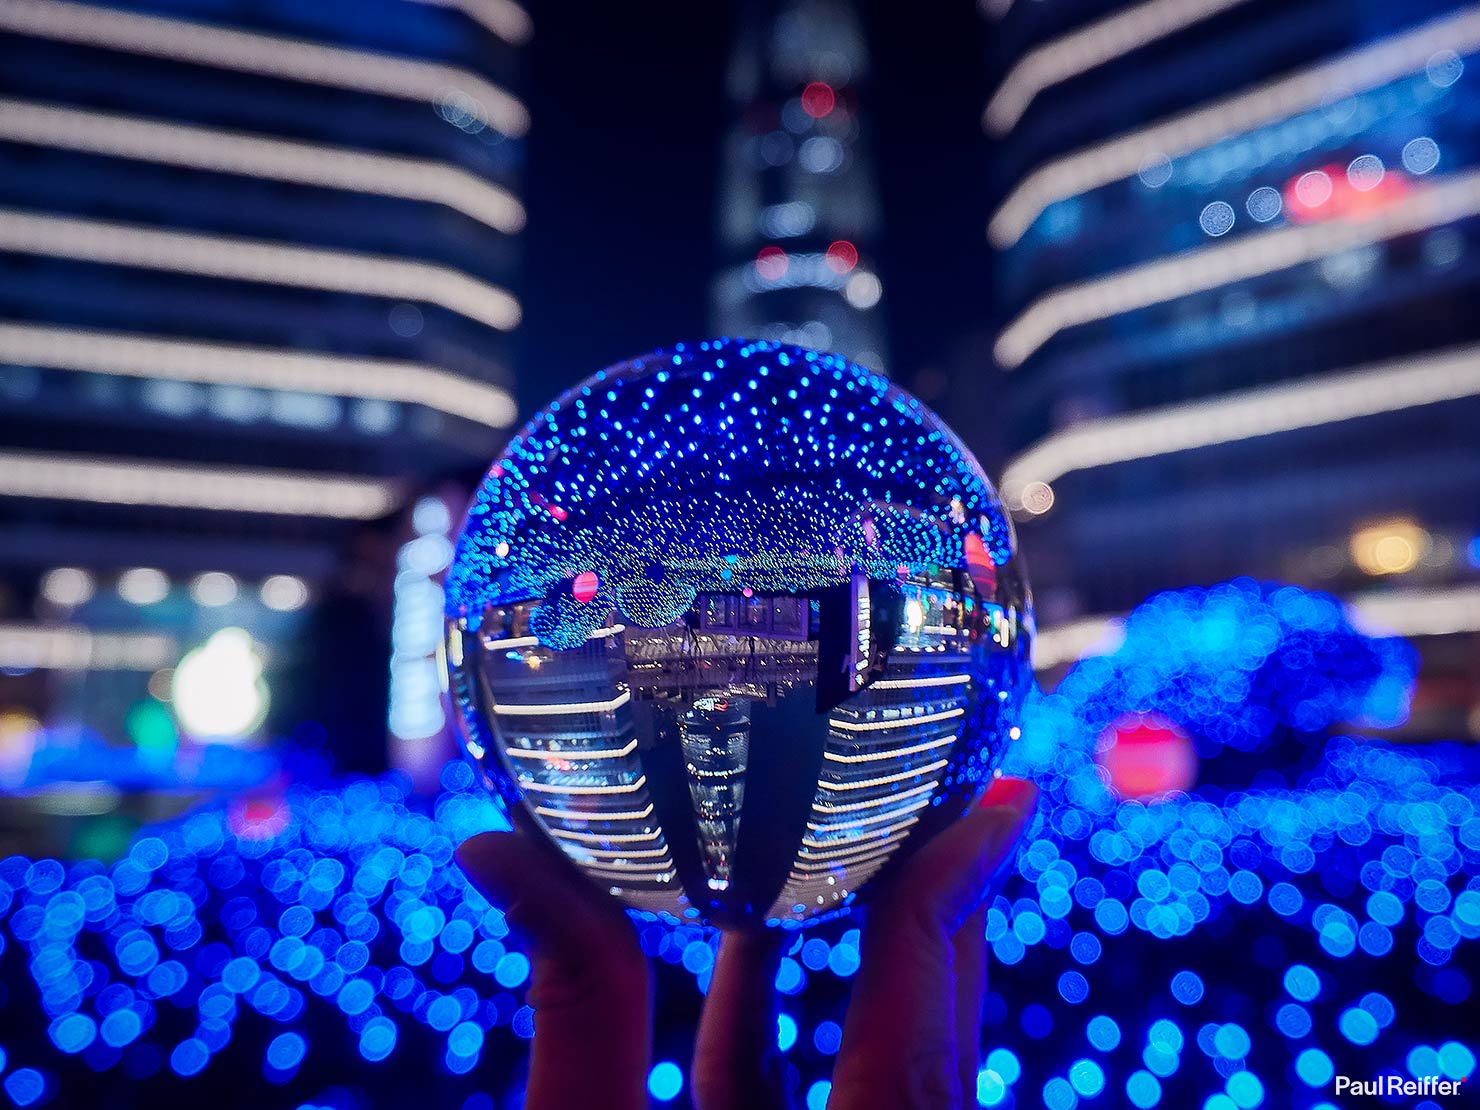 IFC Shanghai Lujiazui Towers Blue Lights Night Glass Ball Photography Lensball Rollei Guide How To Paul Reiffer Photographer Professional